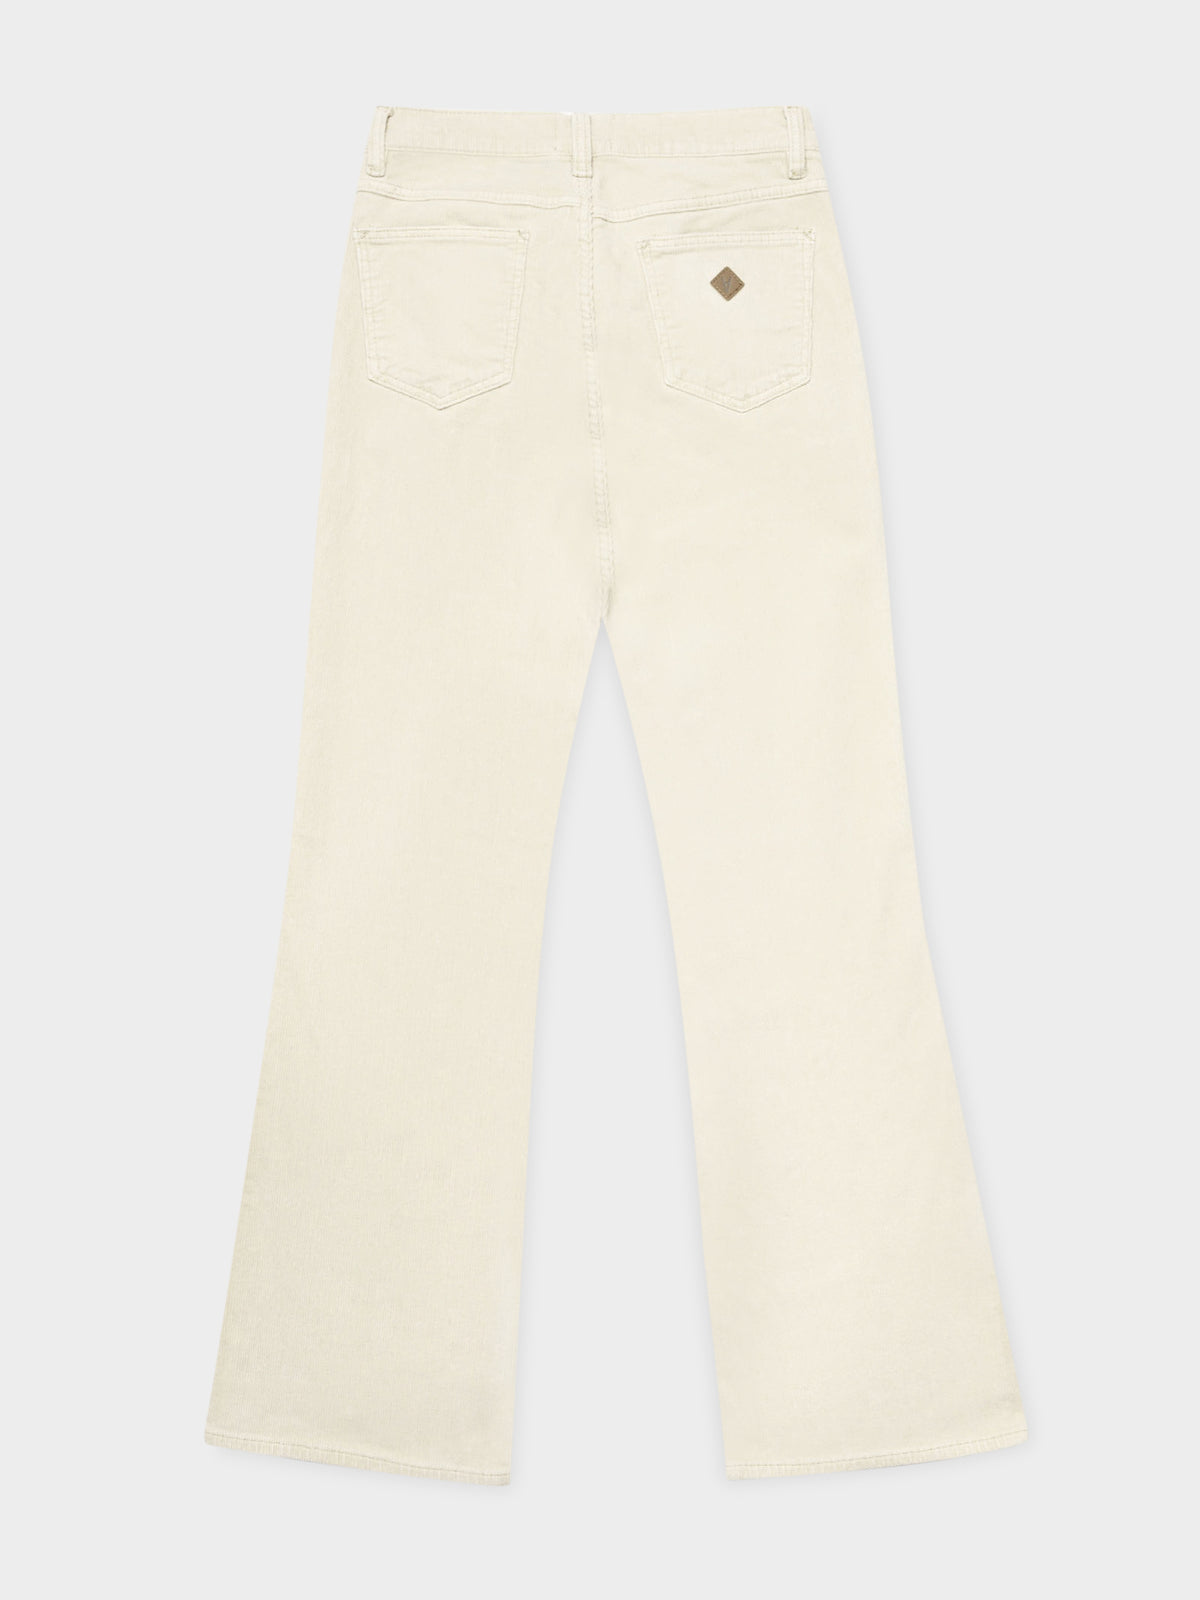 A 99 Low Boot Jeans in Latte Cord